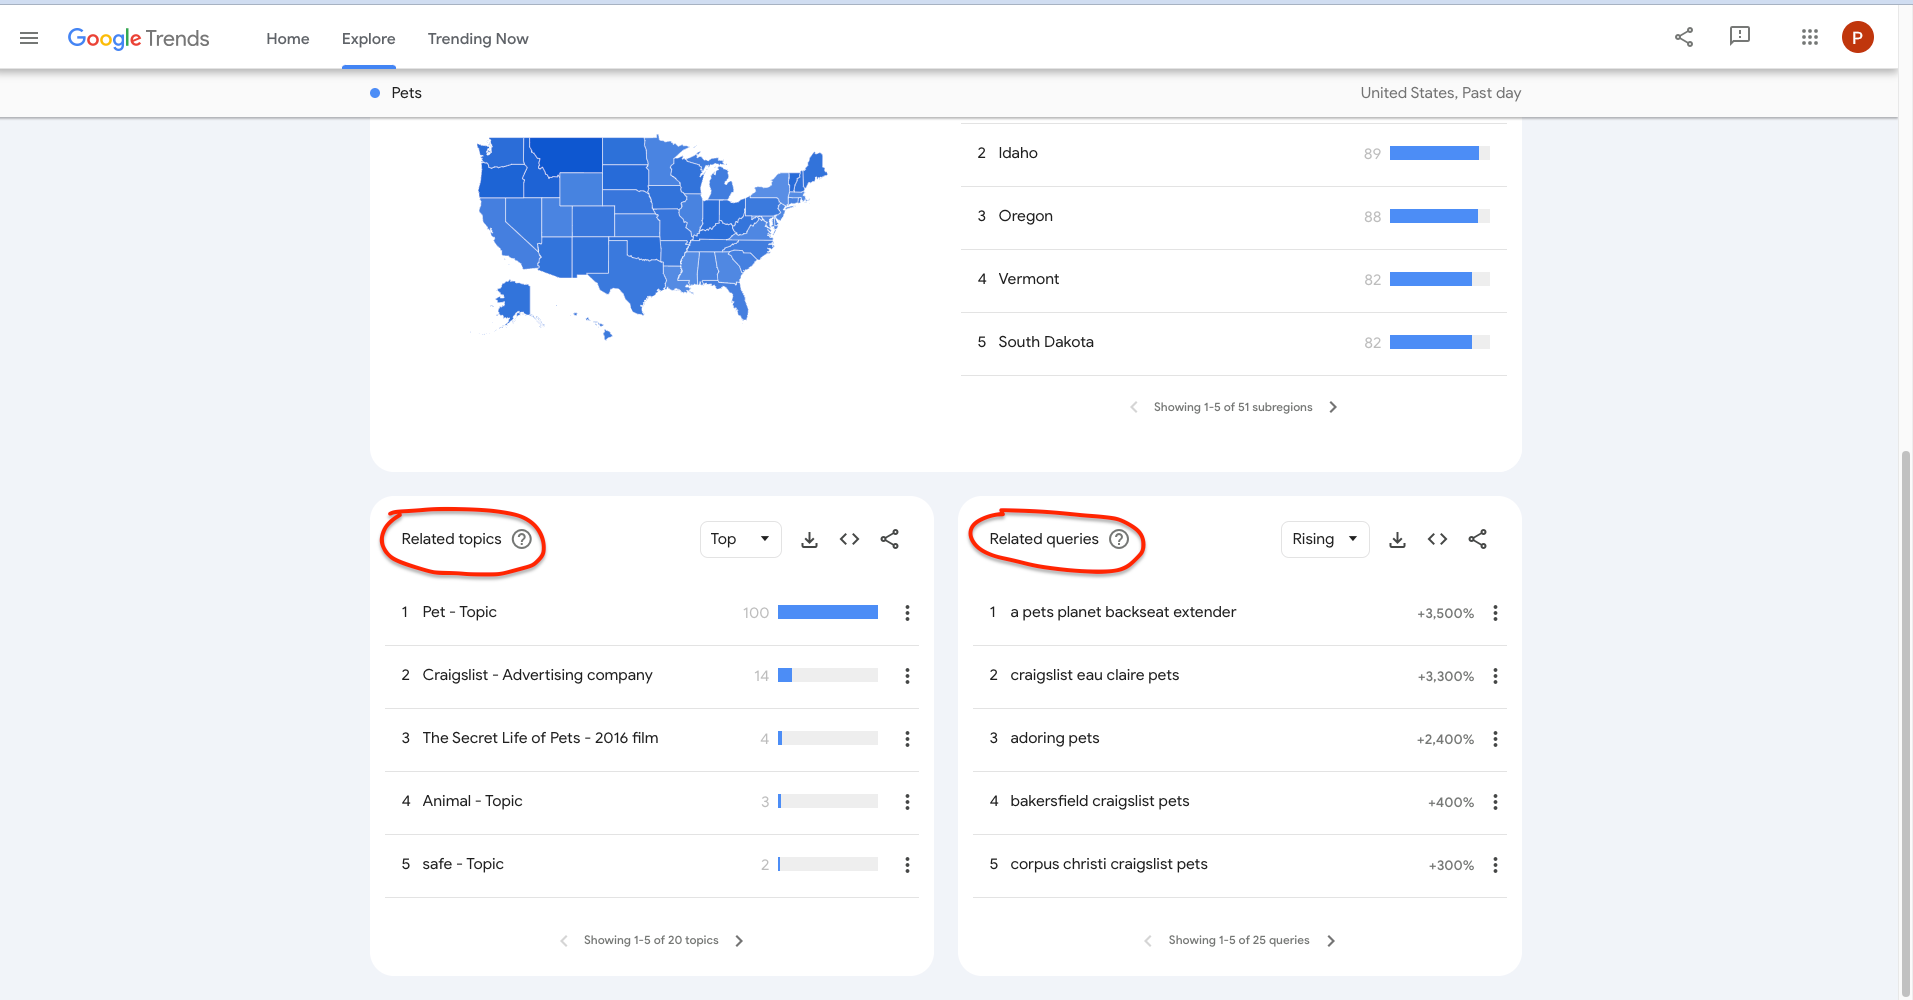 Another image taken from Google Trends on how you can use related topics and queries in your market research